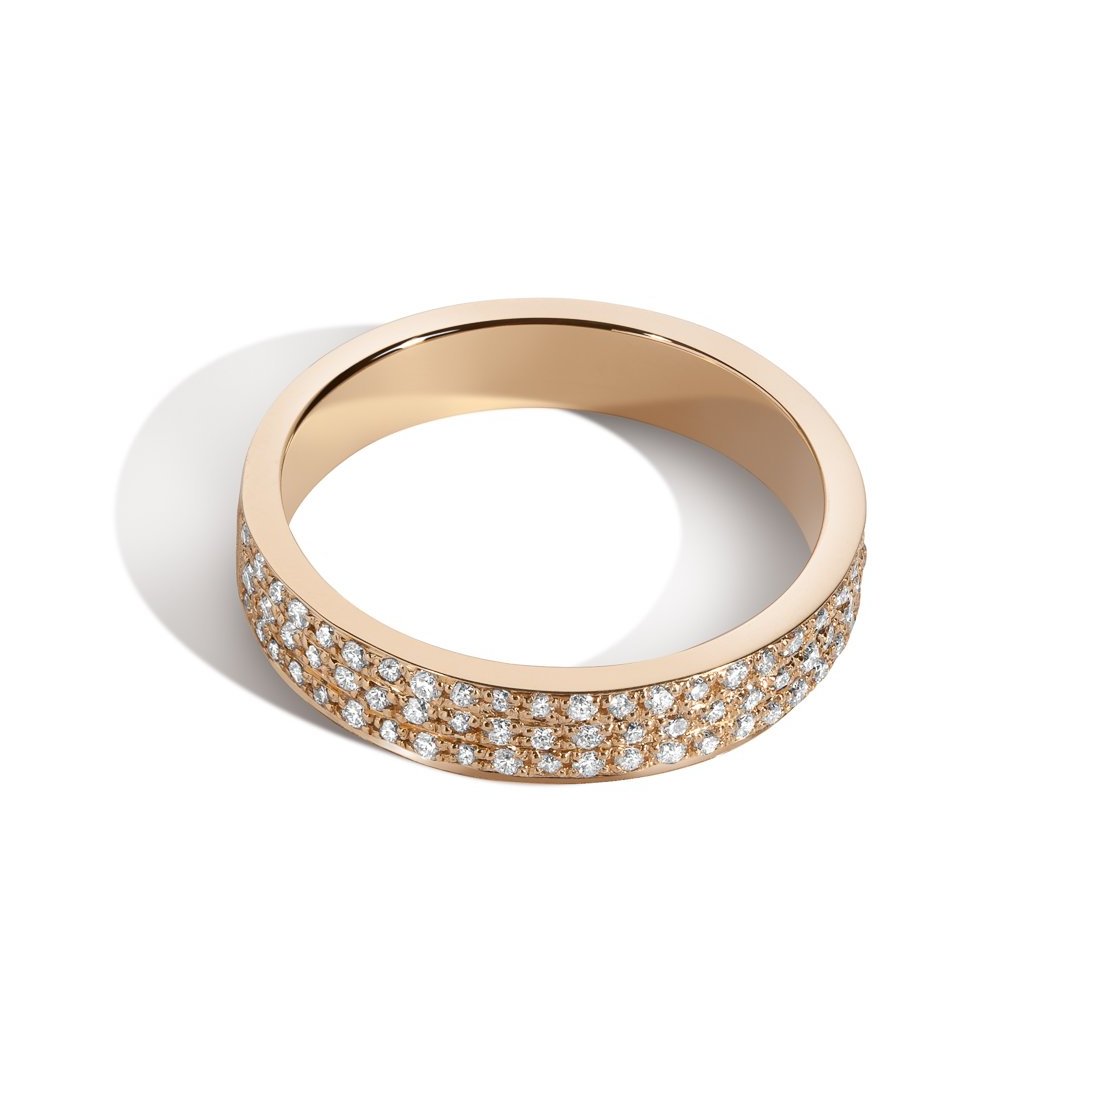 Shahla Karimi Jewelry Every Love Better Half Pave Band 14/18K Yellow Gold